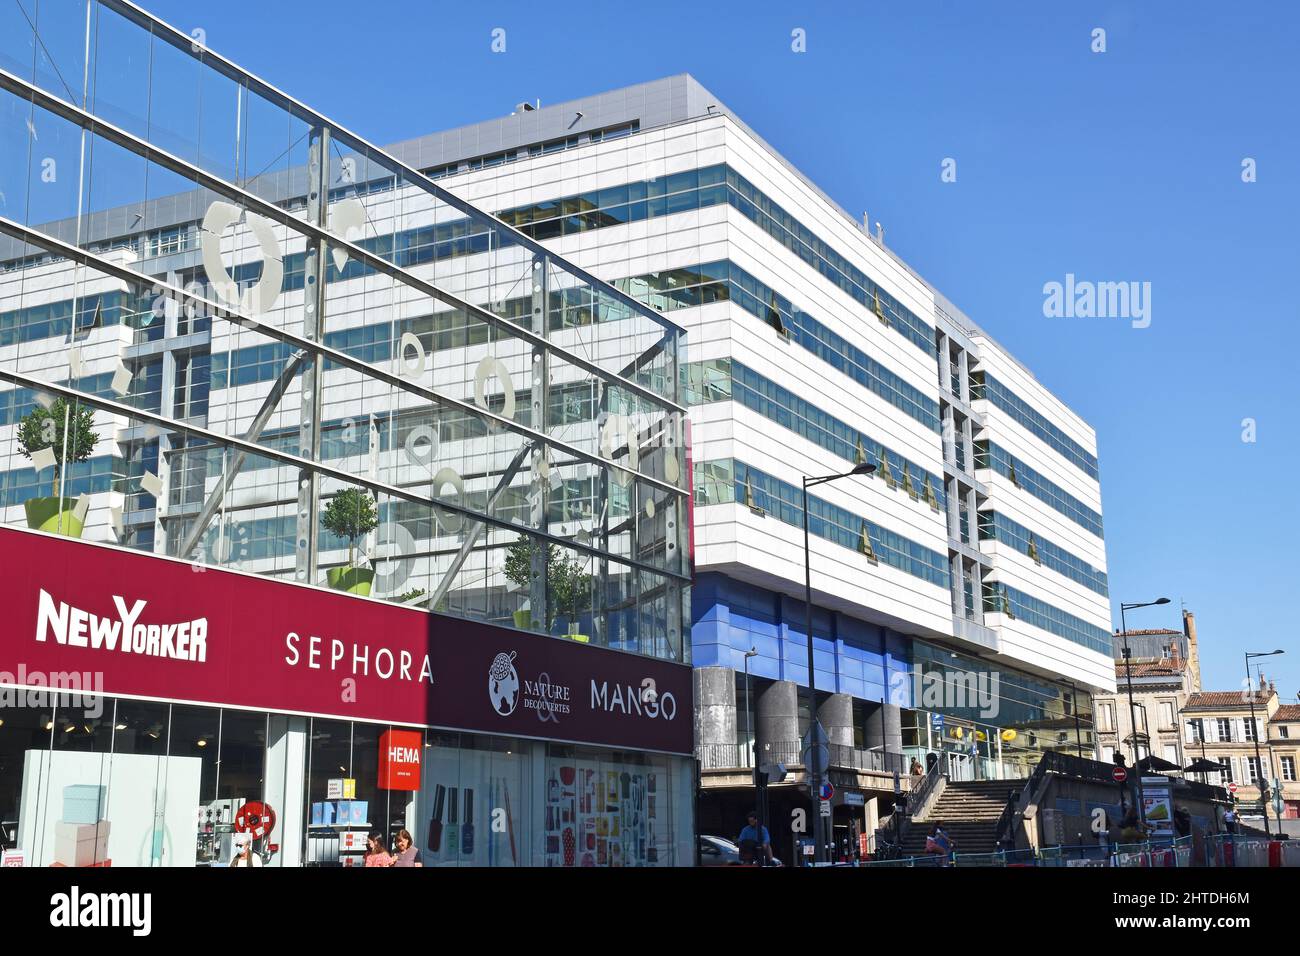 The Mériadeck centre, Centre commercial Mériadeck, the usual bland box, 43000 sq ms of shops services & retaurants & Auchan hypermarket opened 1980 Stock Photo